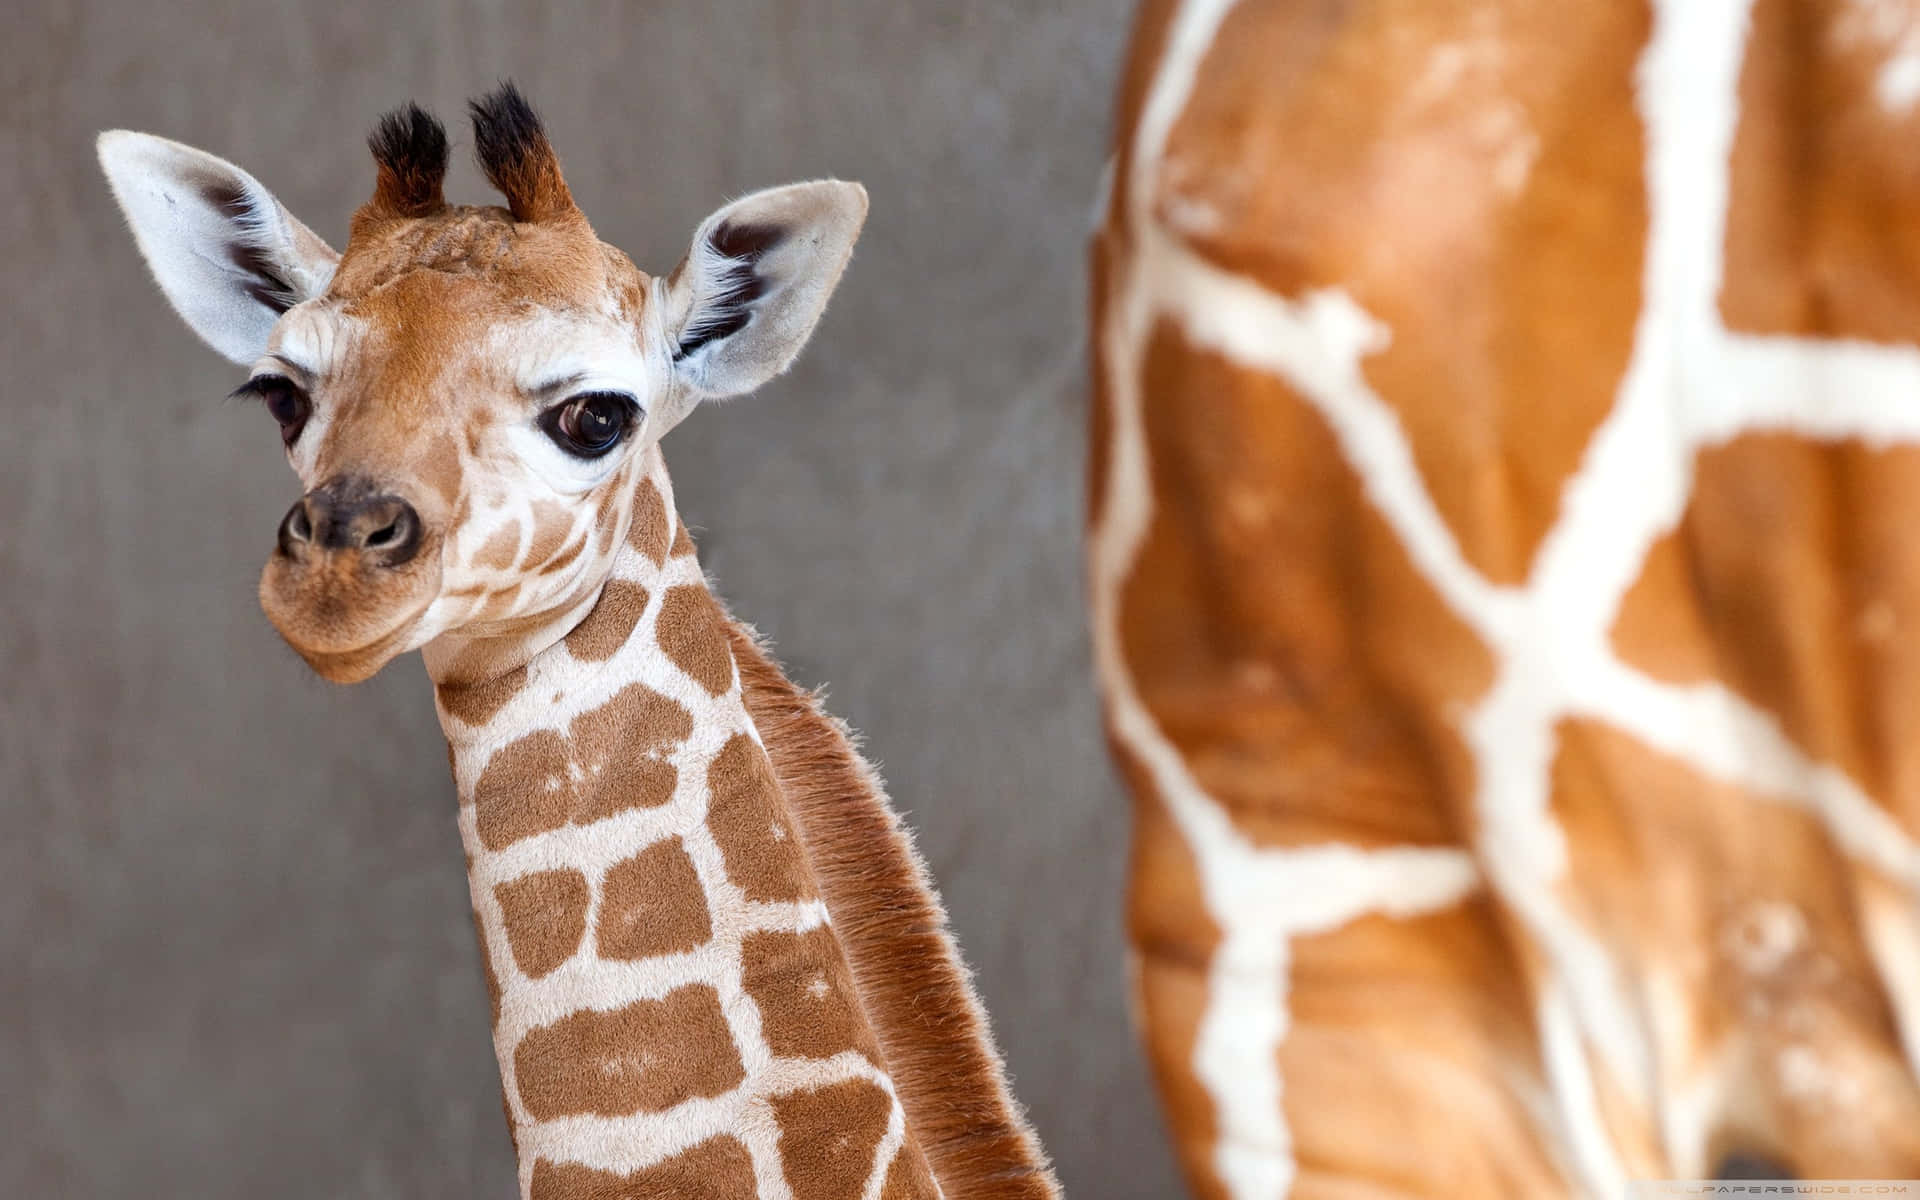 "Adorable Baby Giraffe Snuggling with Its Mom"